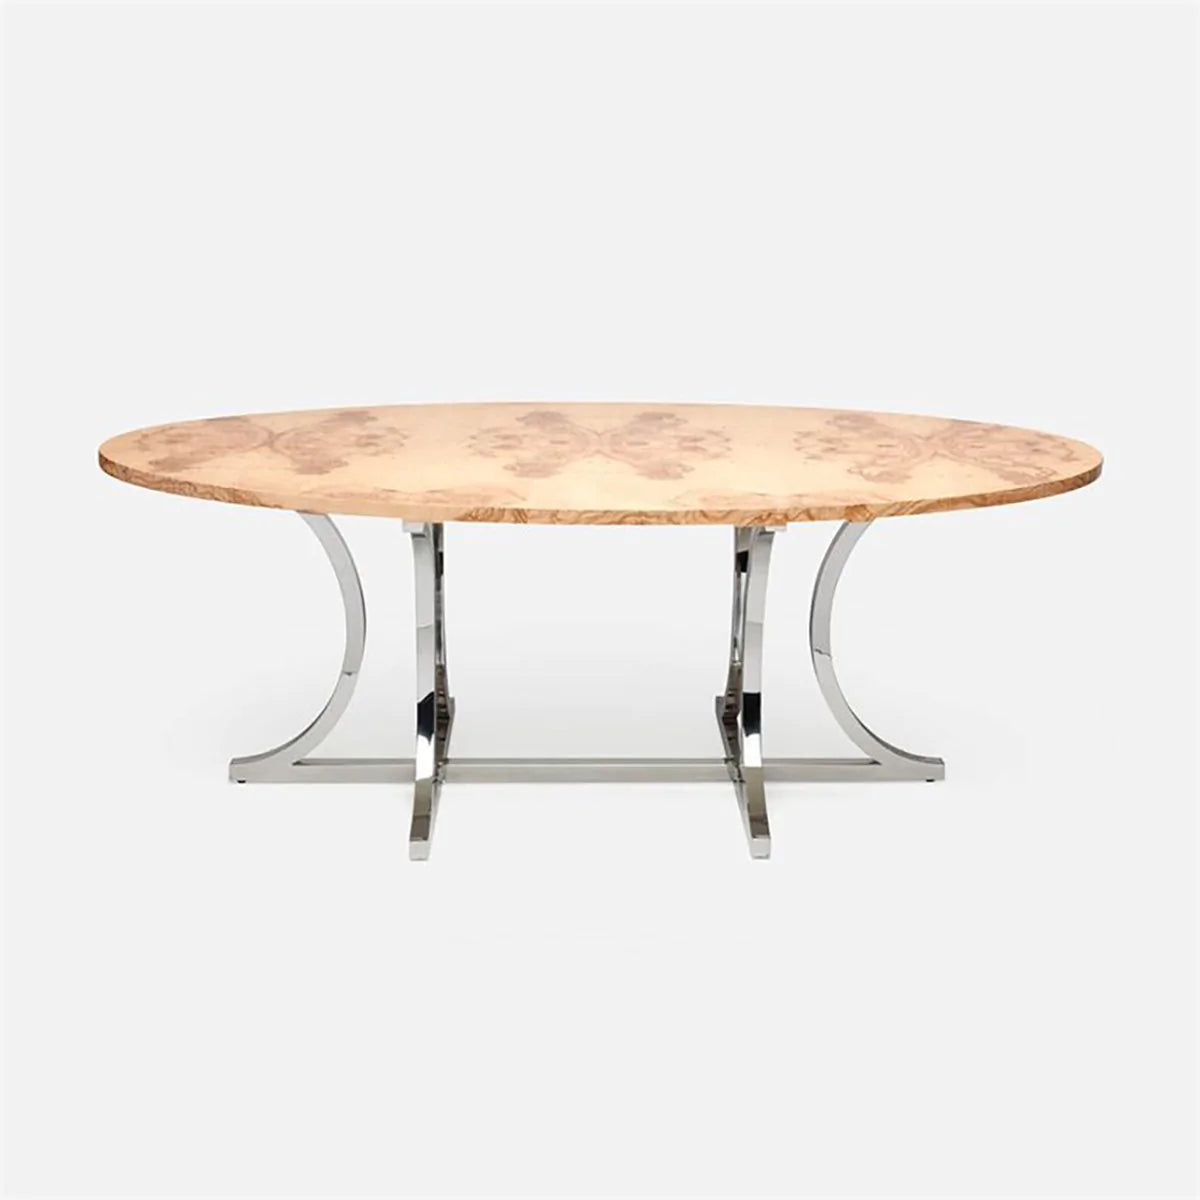 Made Goods Leighton Oval Curved Metal Dining Table in Veneer Top